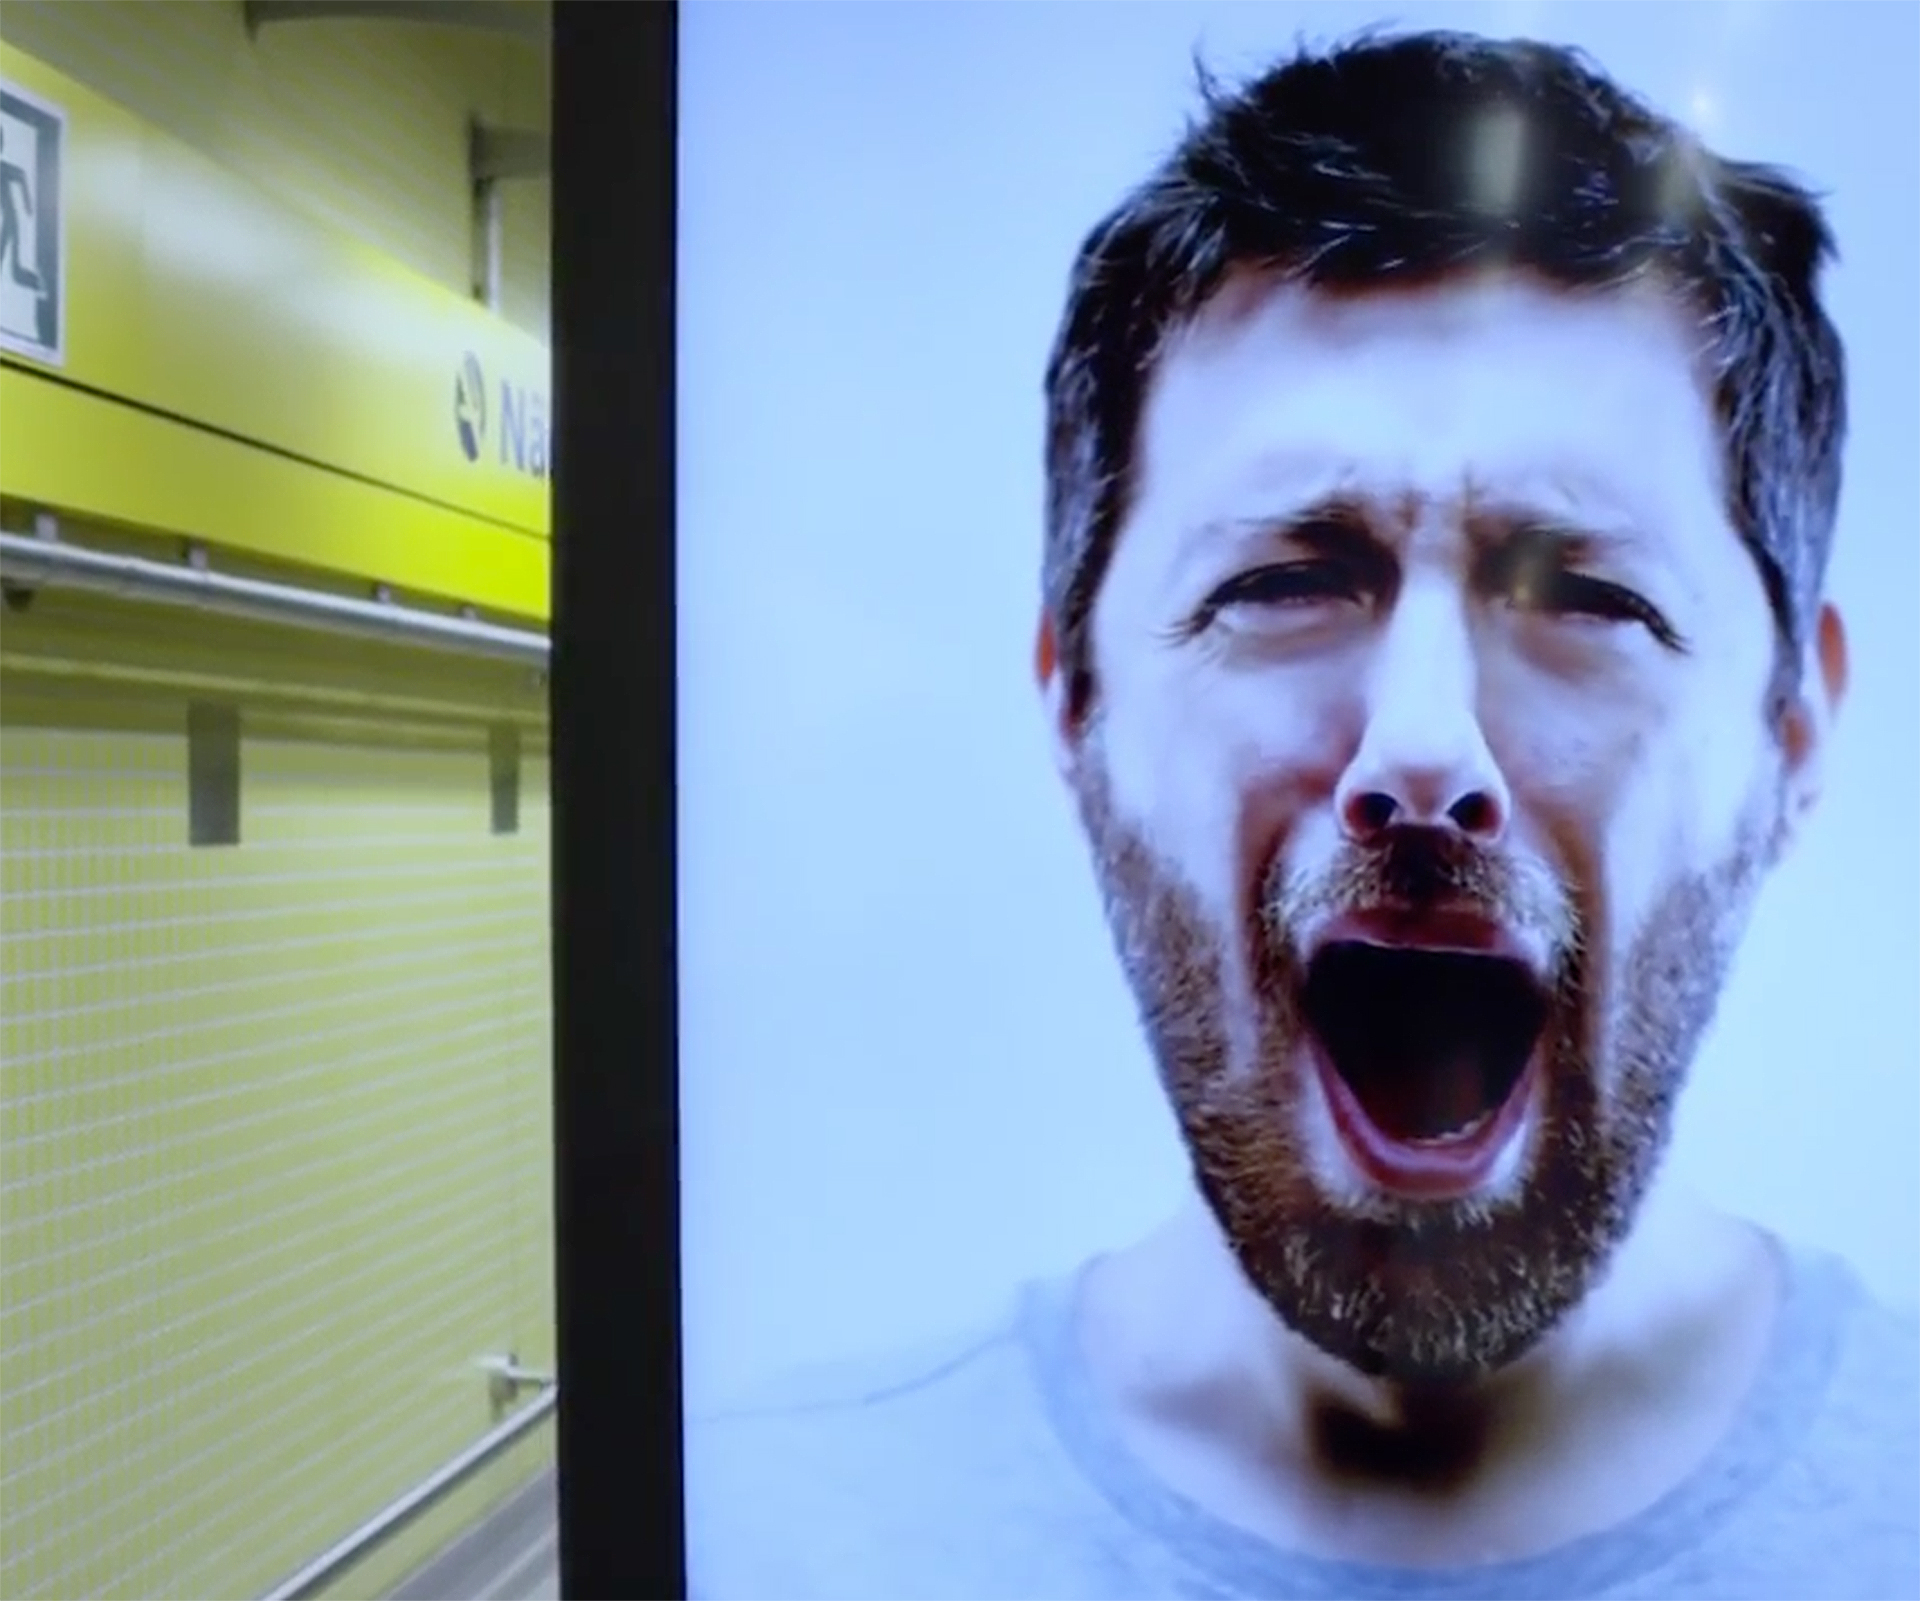 ‘Yawning billboards’ are creating a yawning epidemic that can only coffee can solve